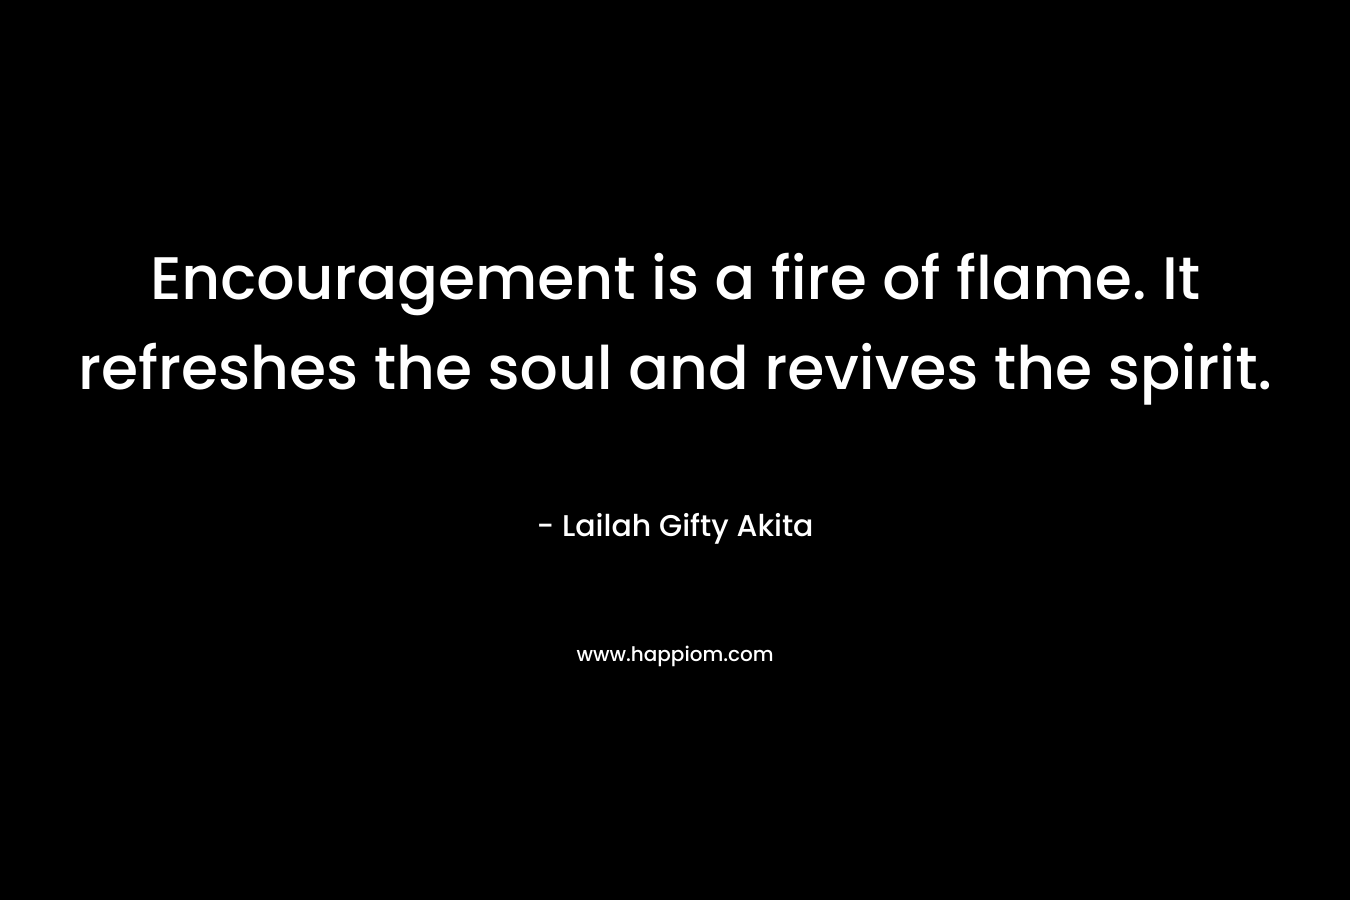 Encouragement is a fire of flame. It refreshes the soul and revives the spirit. – Lailah Gifty Akita